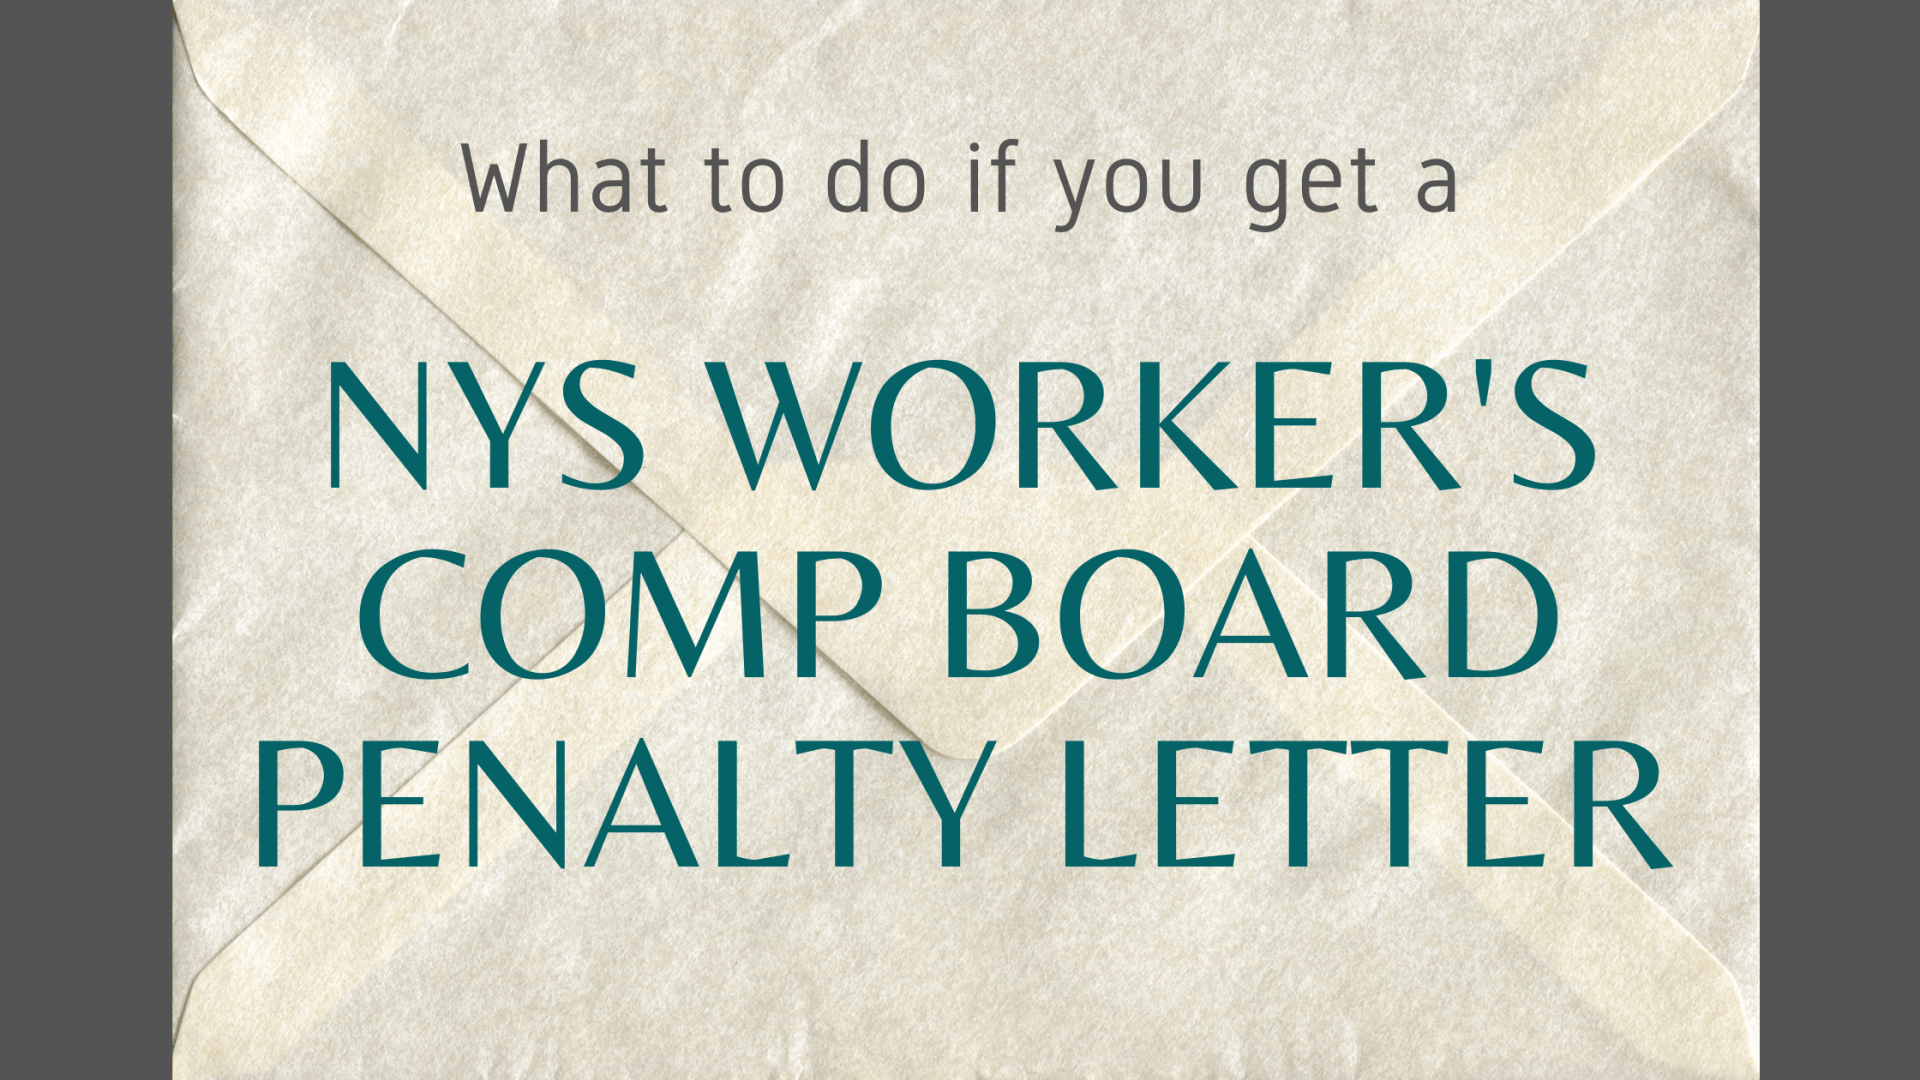 What to do if you get a NY State Worker’s Comp Board Penalty Letter